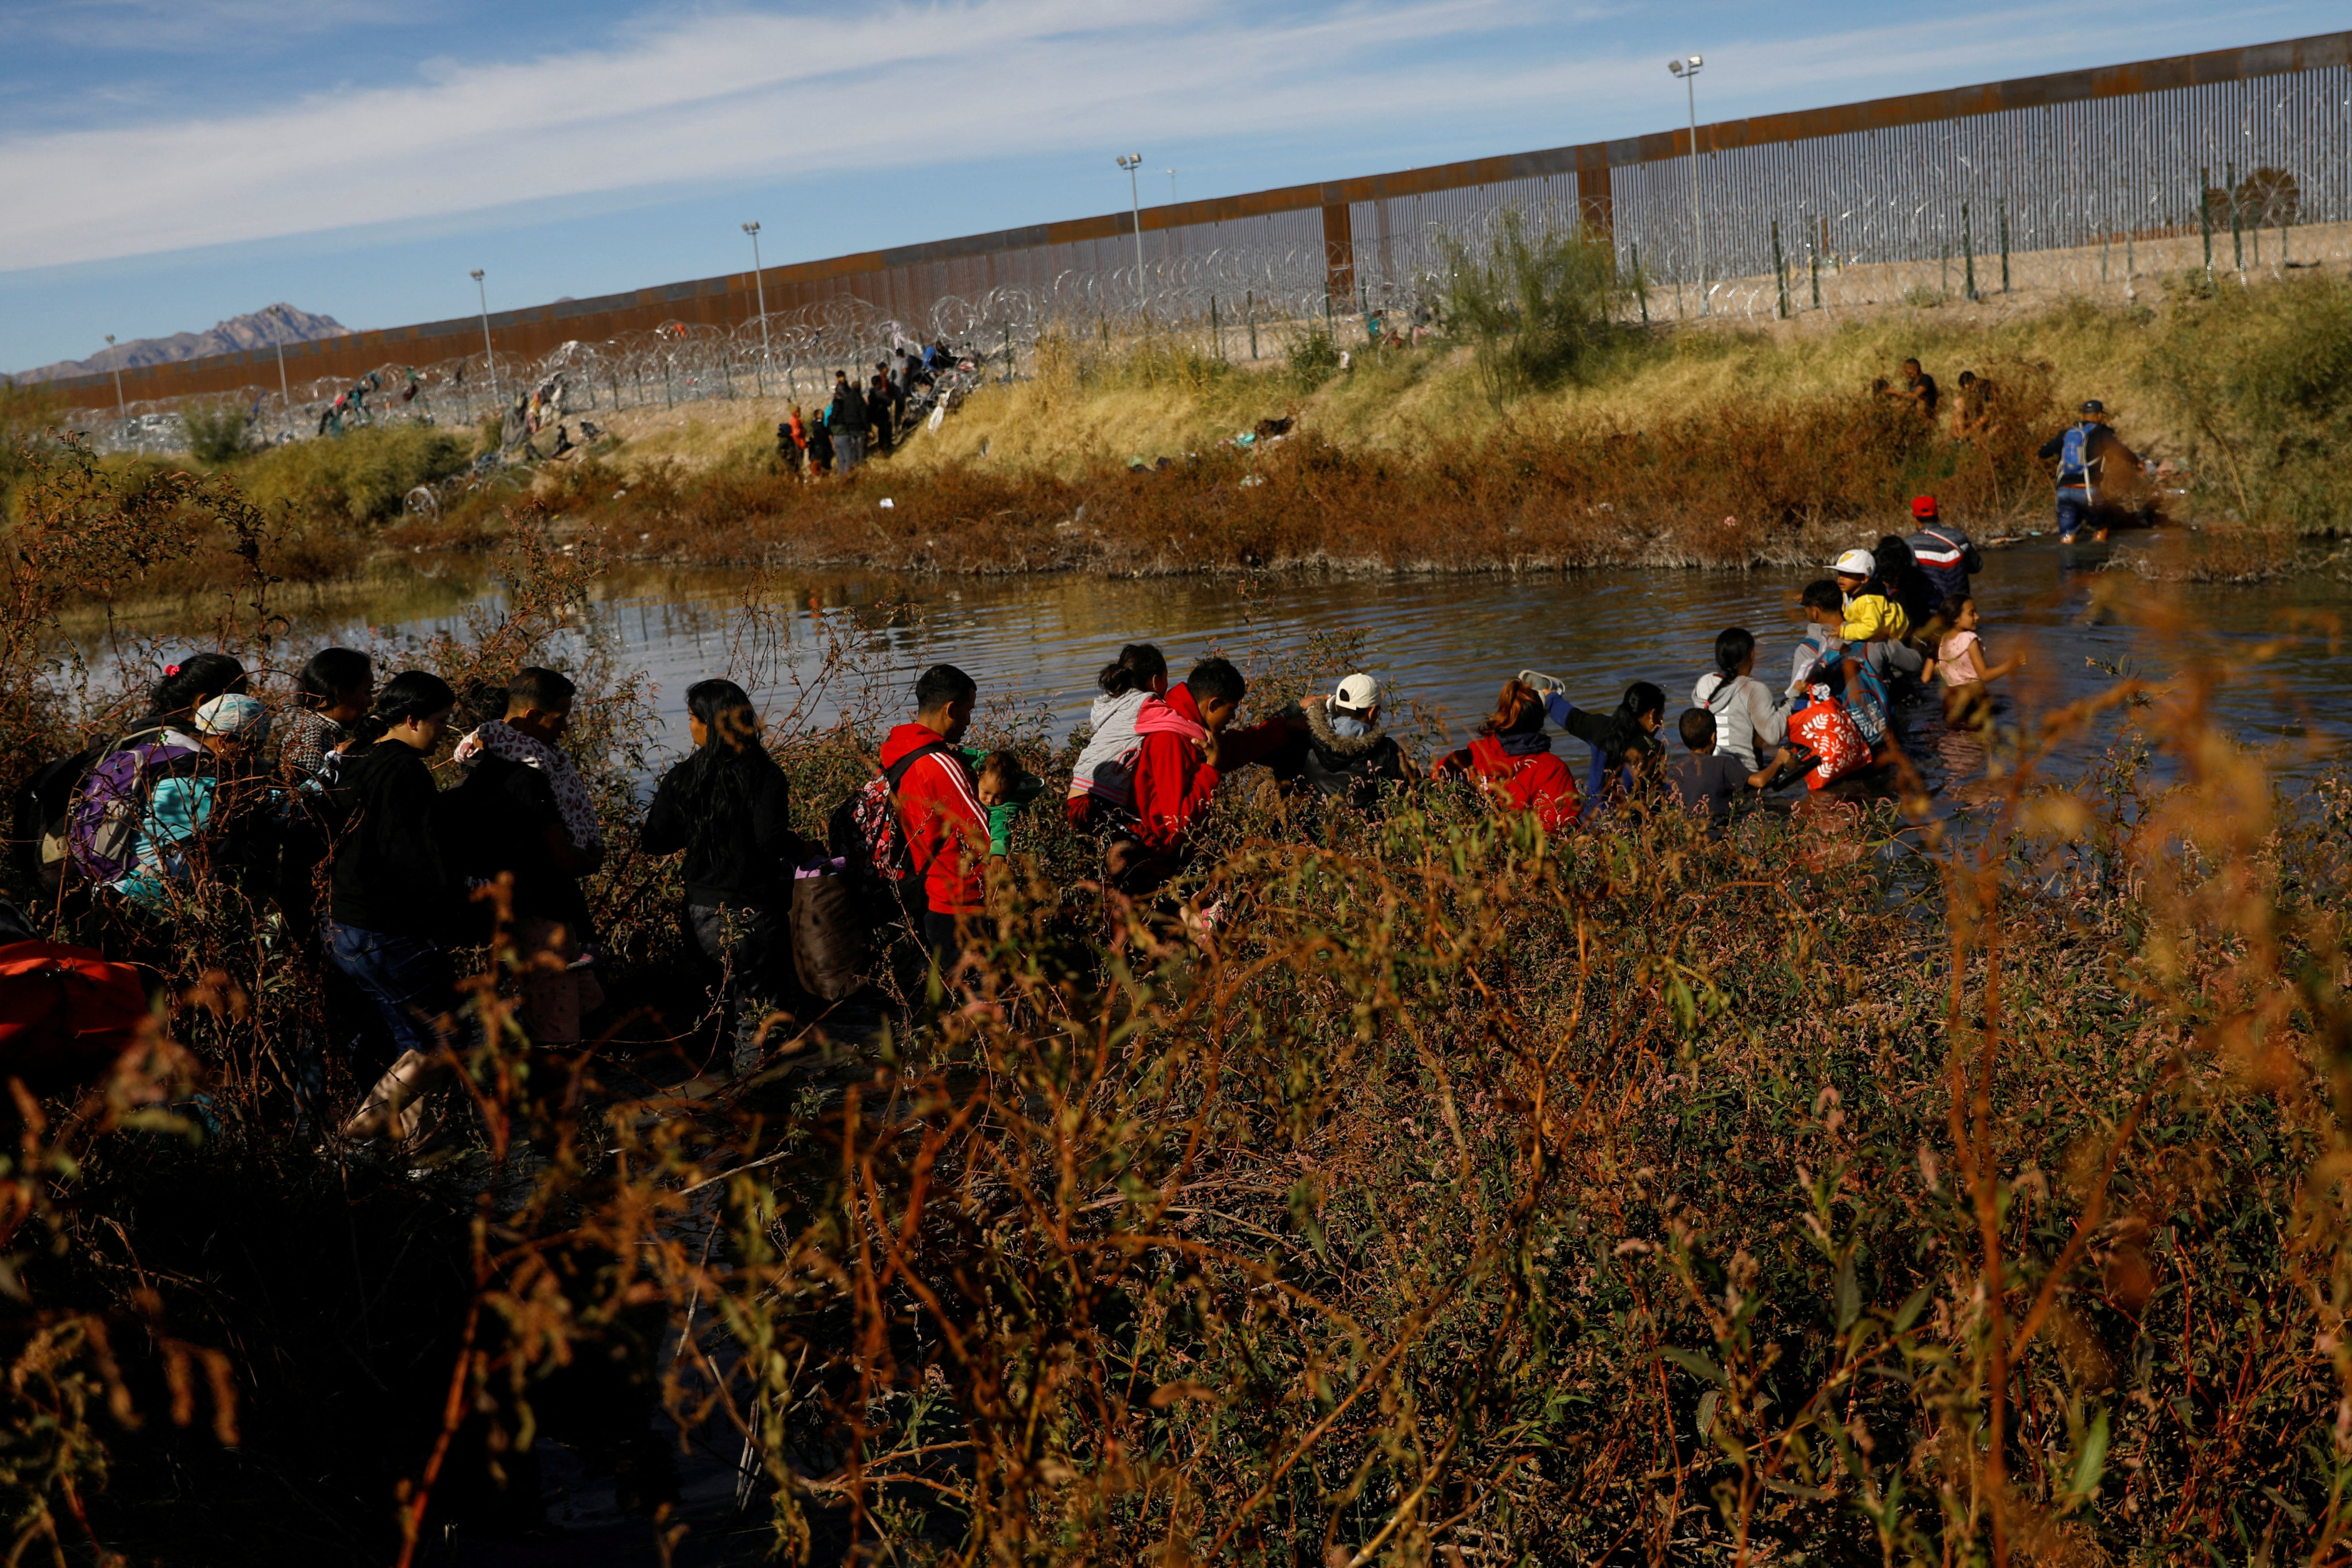 Migrants seeking asylum in the United States cross the Rio Bravo River, the border between the US and Mexico, as seen from Ciudad Juarez, Mexico, on December 5. Photo: Reuters